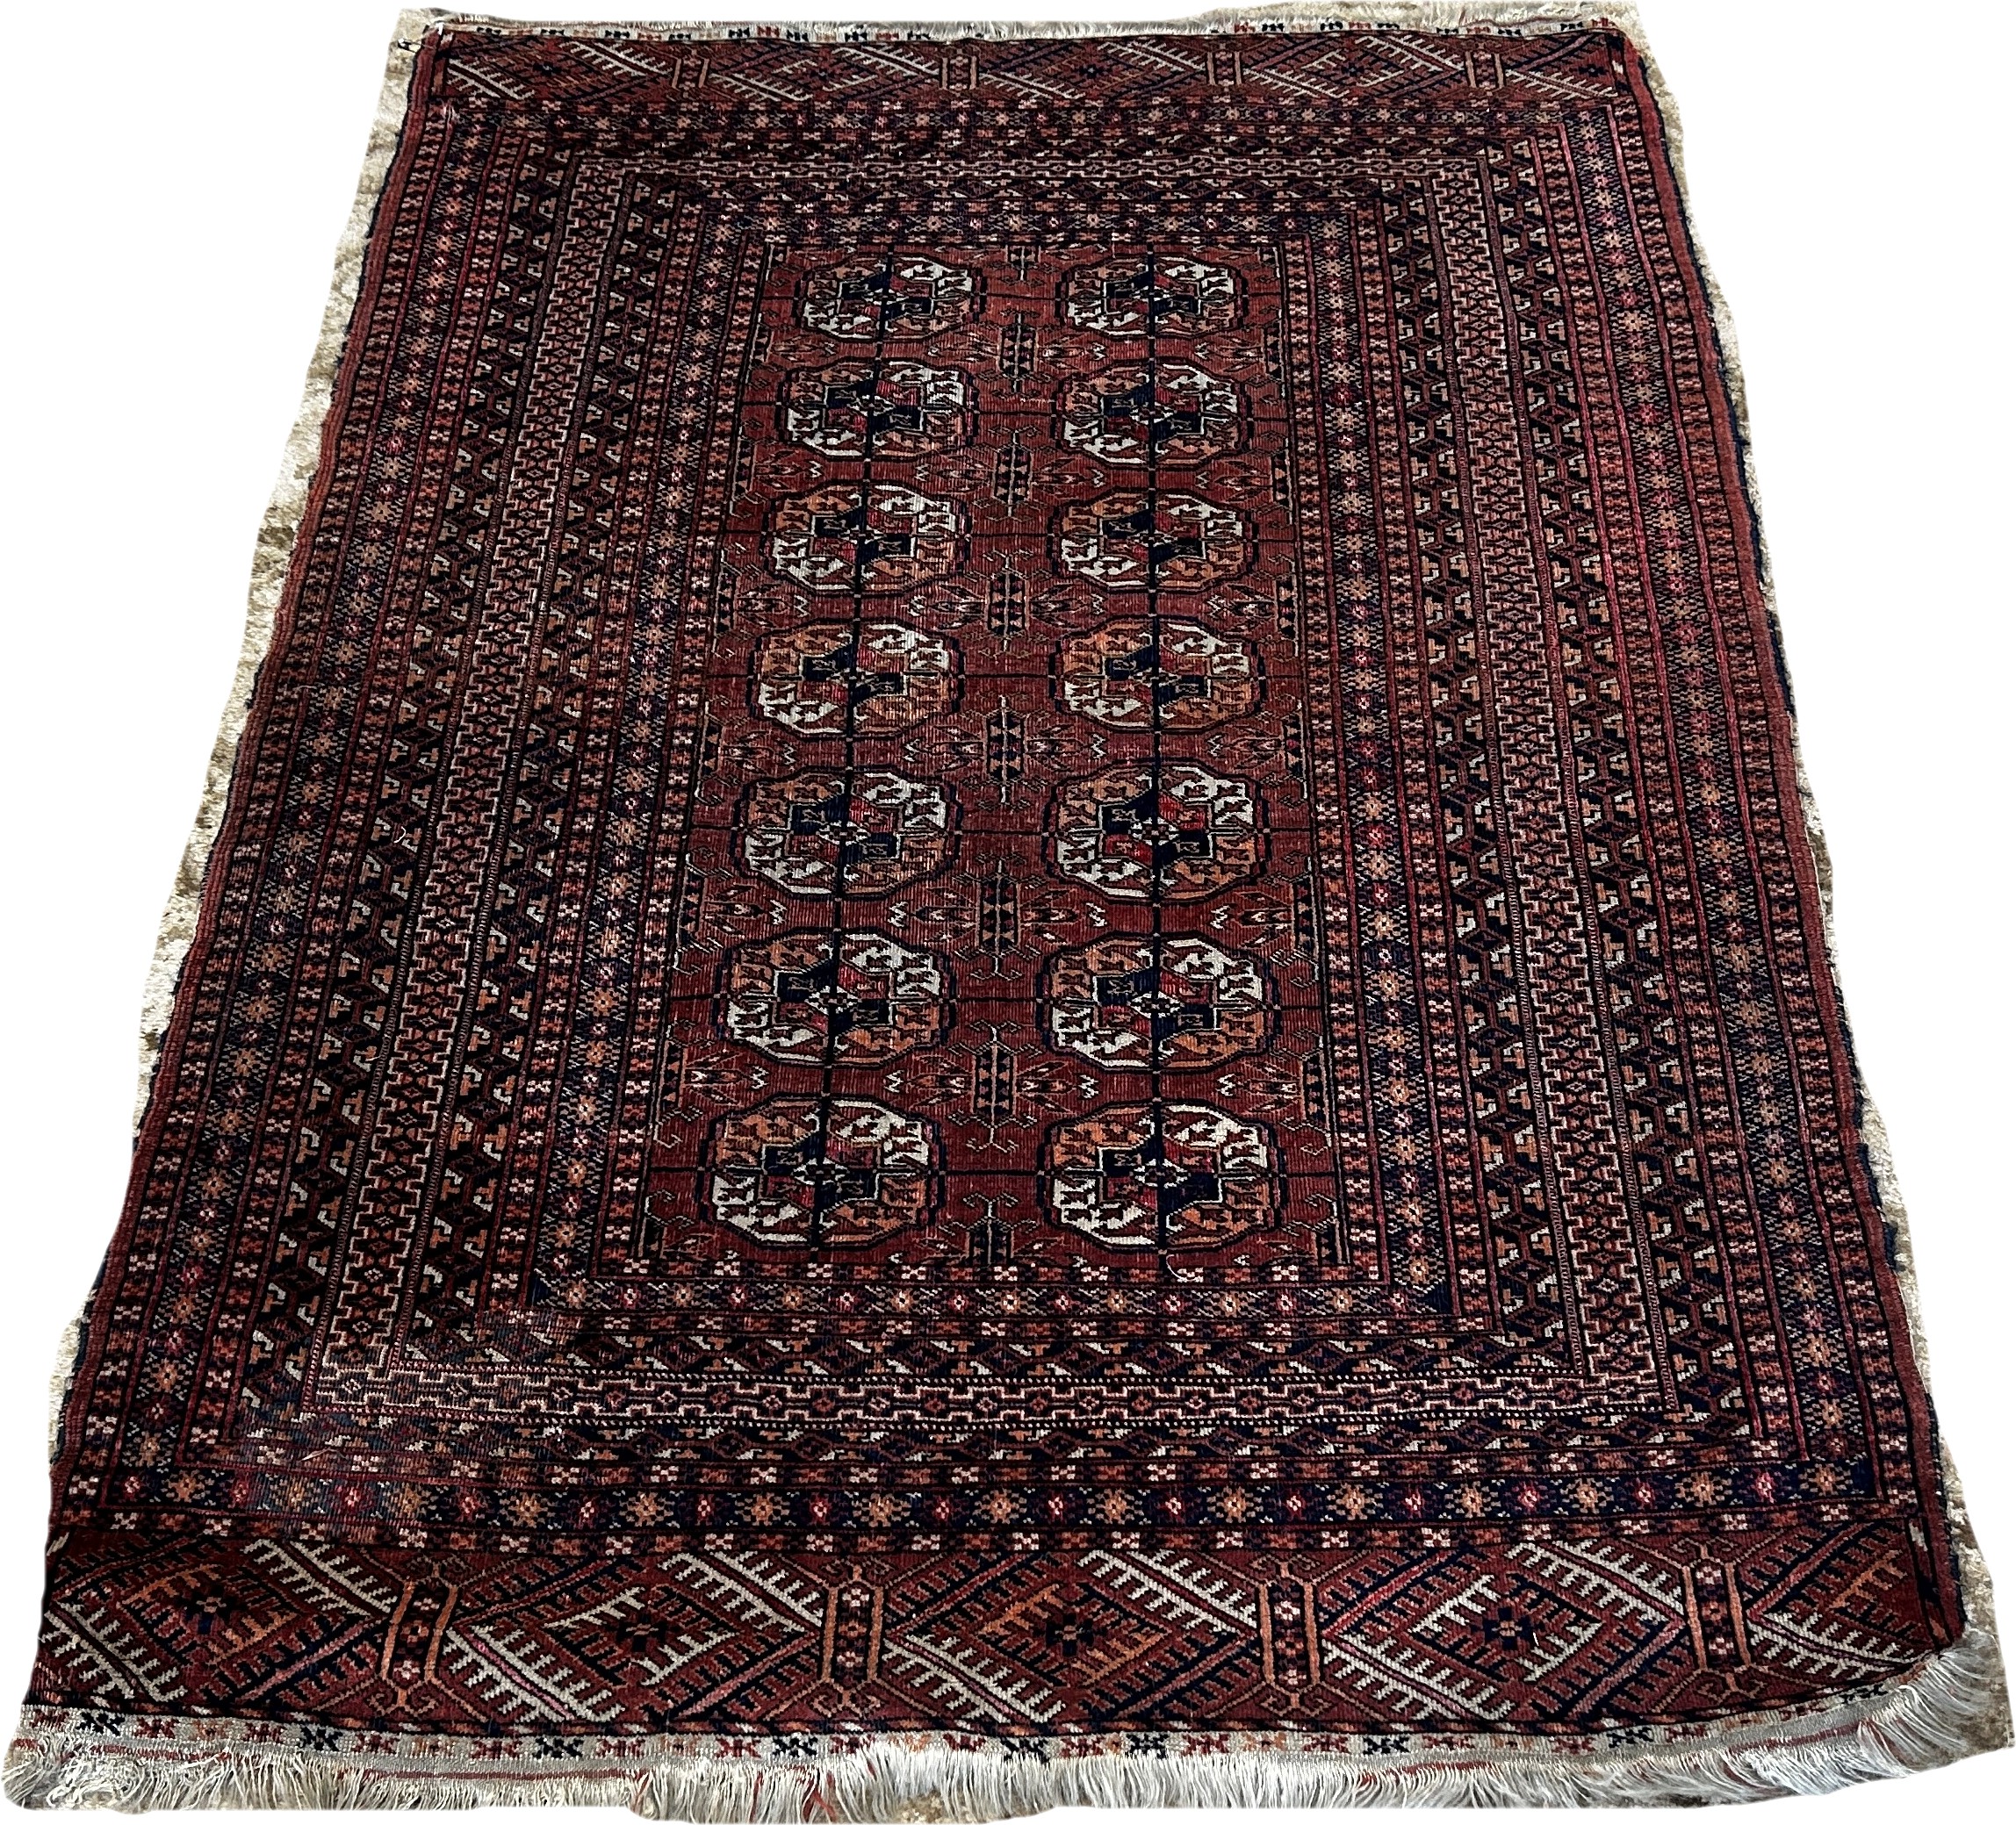 A Bokara Tekke rug with two rows of elephant foot guls on a red ground, 147cm x 103cm approximately - Image 2 of 3